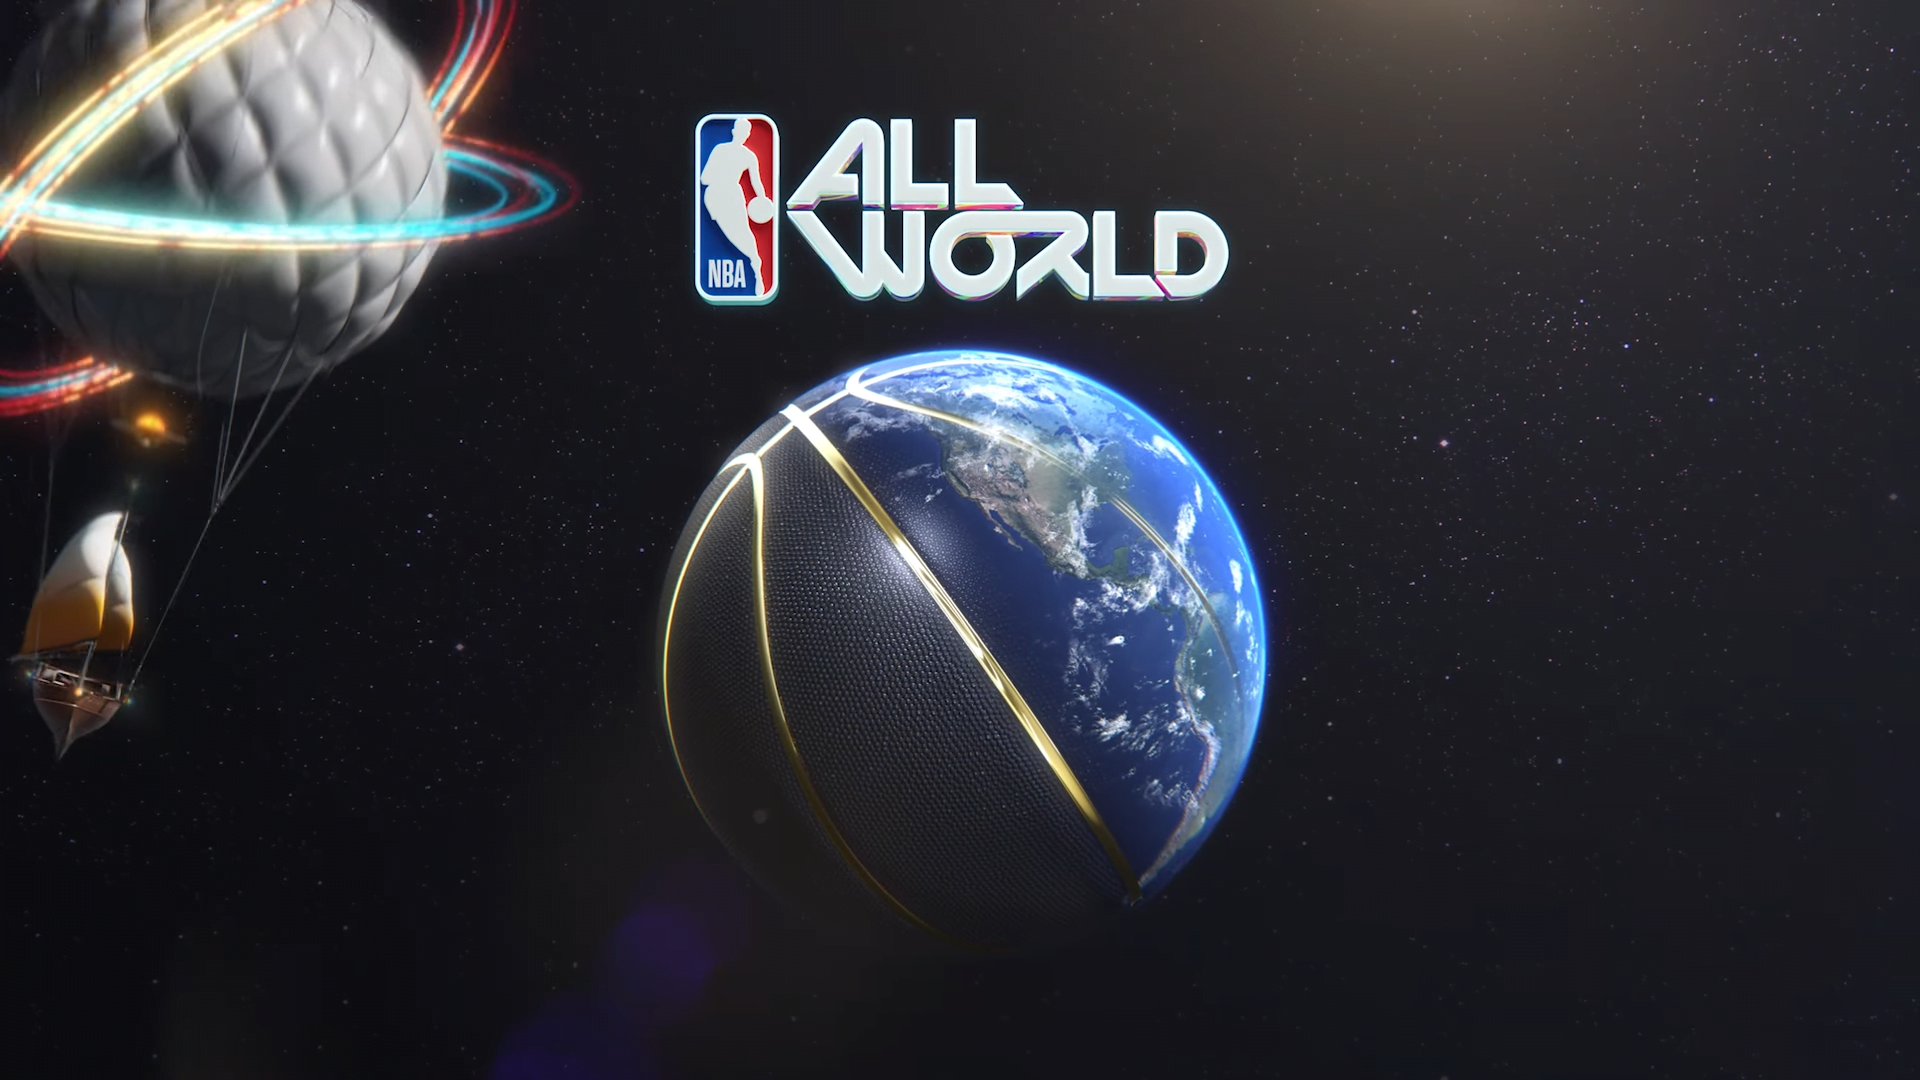 In Niantic’s NBA All World you collect sports stars instead of Pokémon